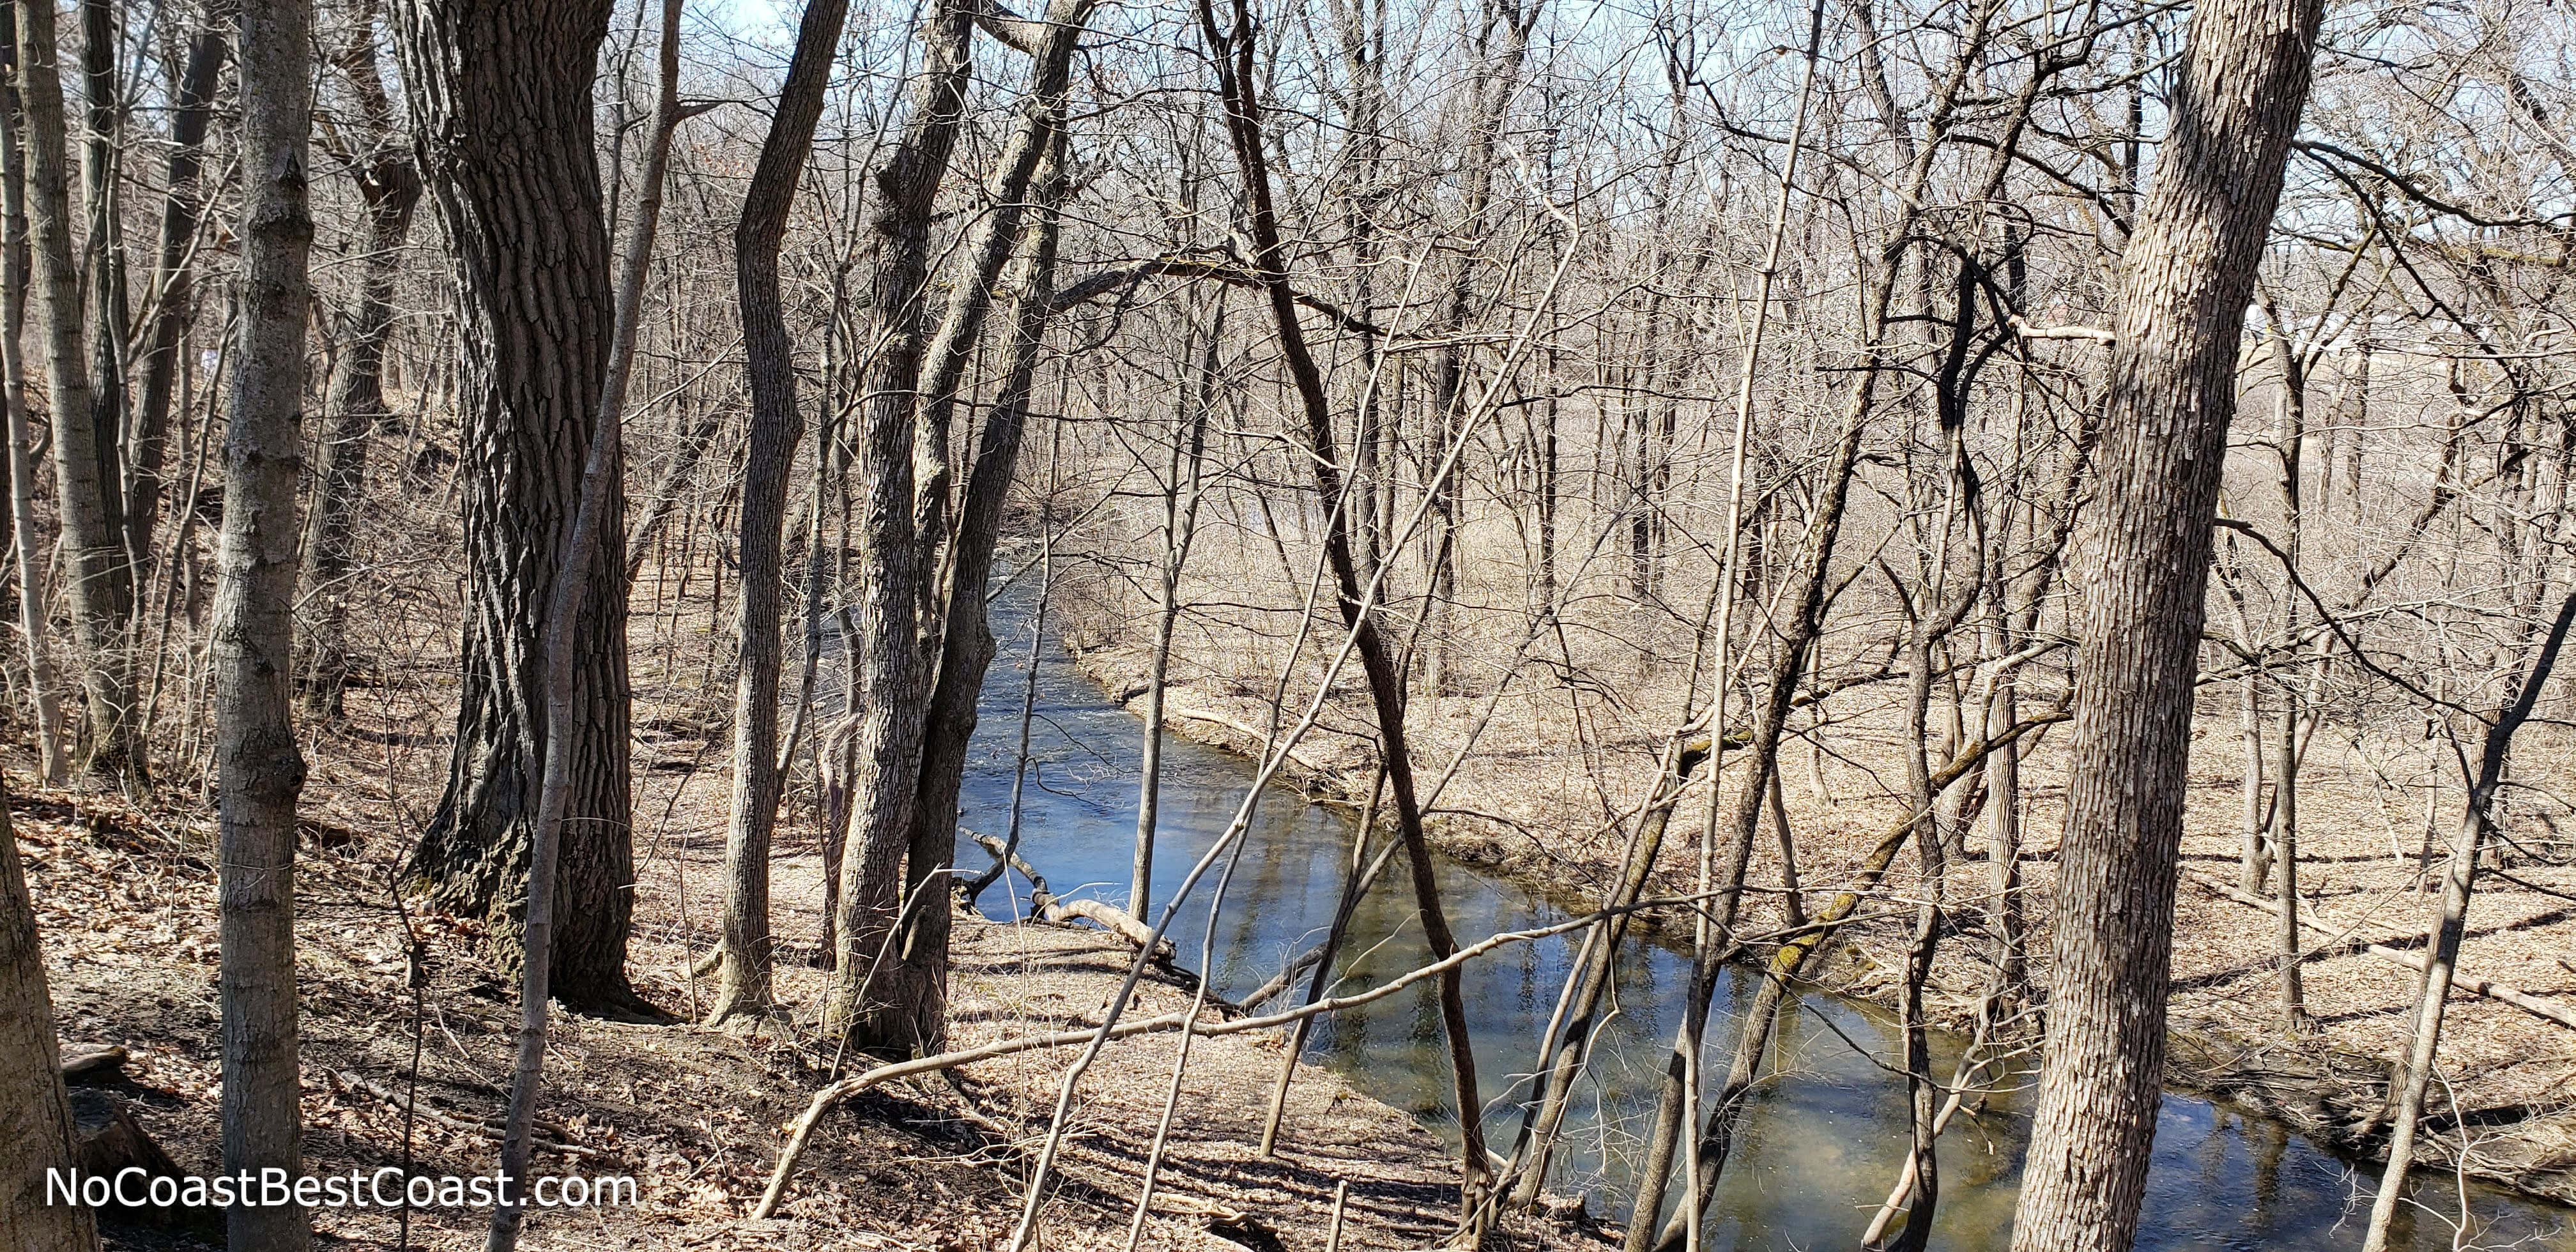 The curving Sawmill Creek through the trees